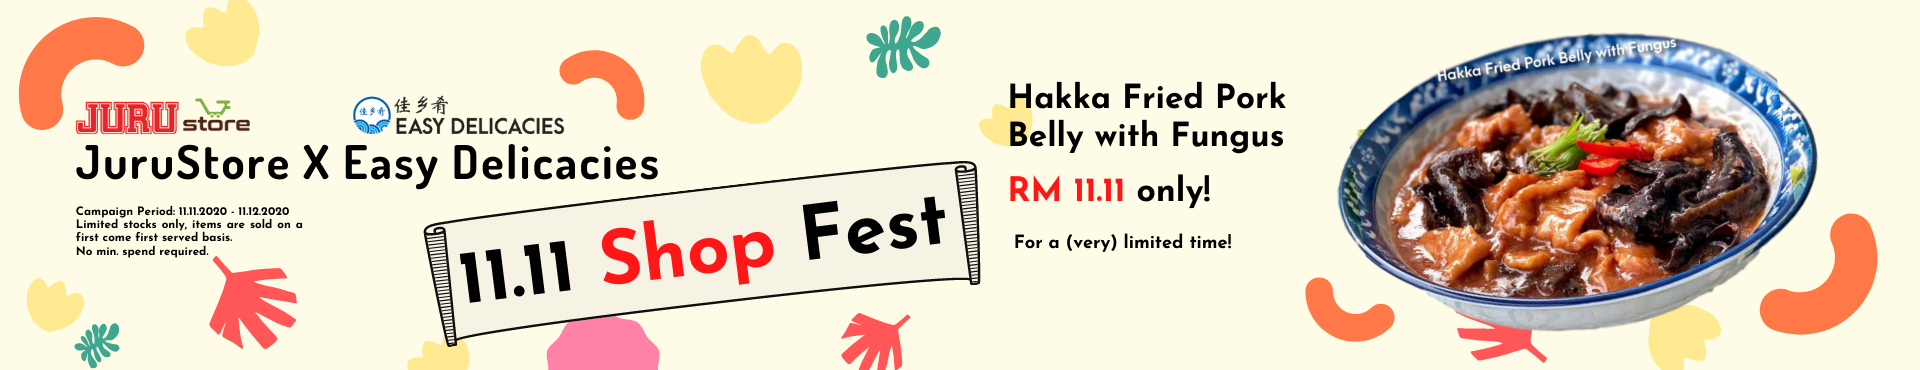 11.11 Shop Fest with Easy Delicacies